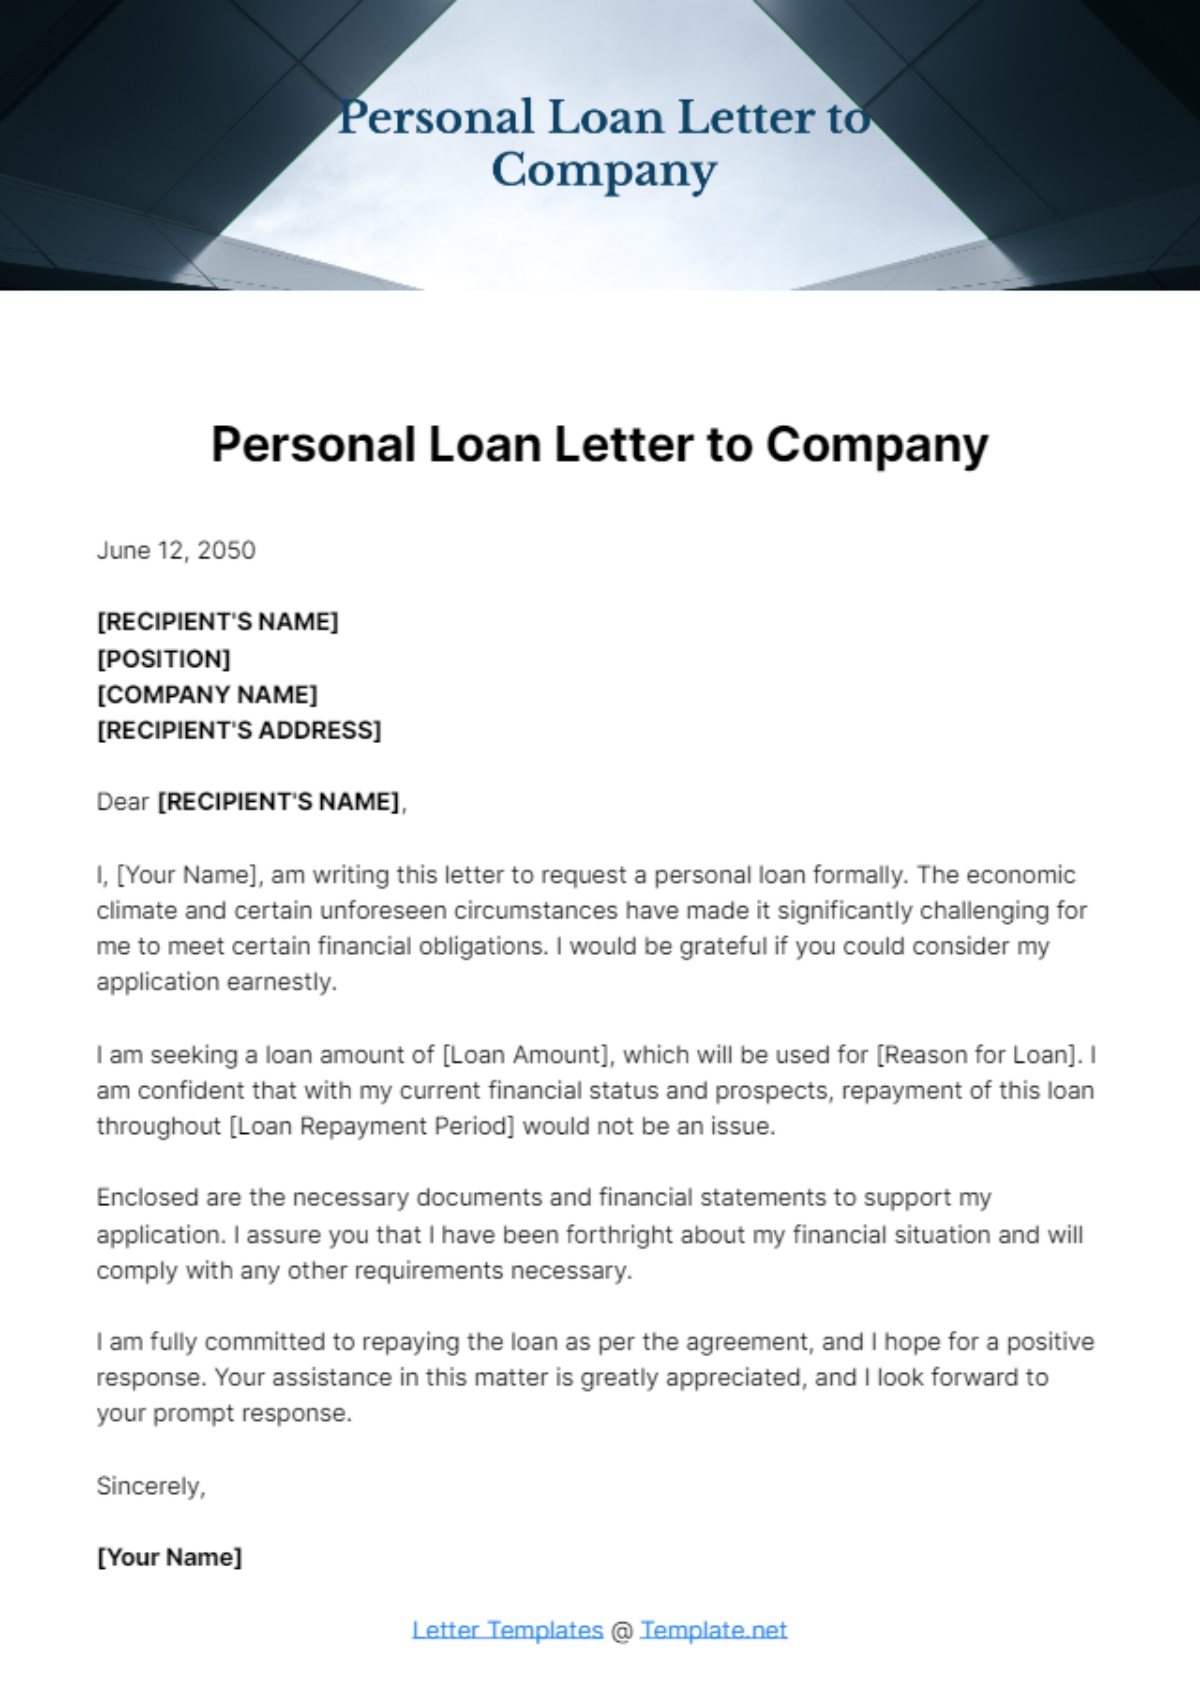 Free Personal Loan Letter to Company Template